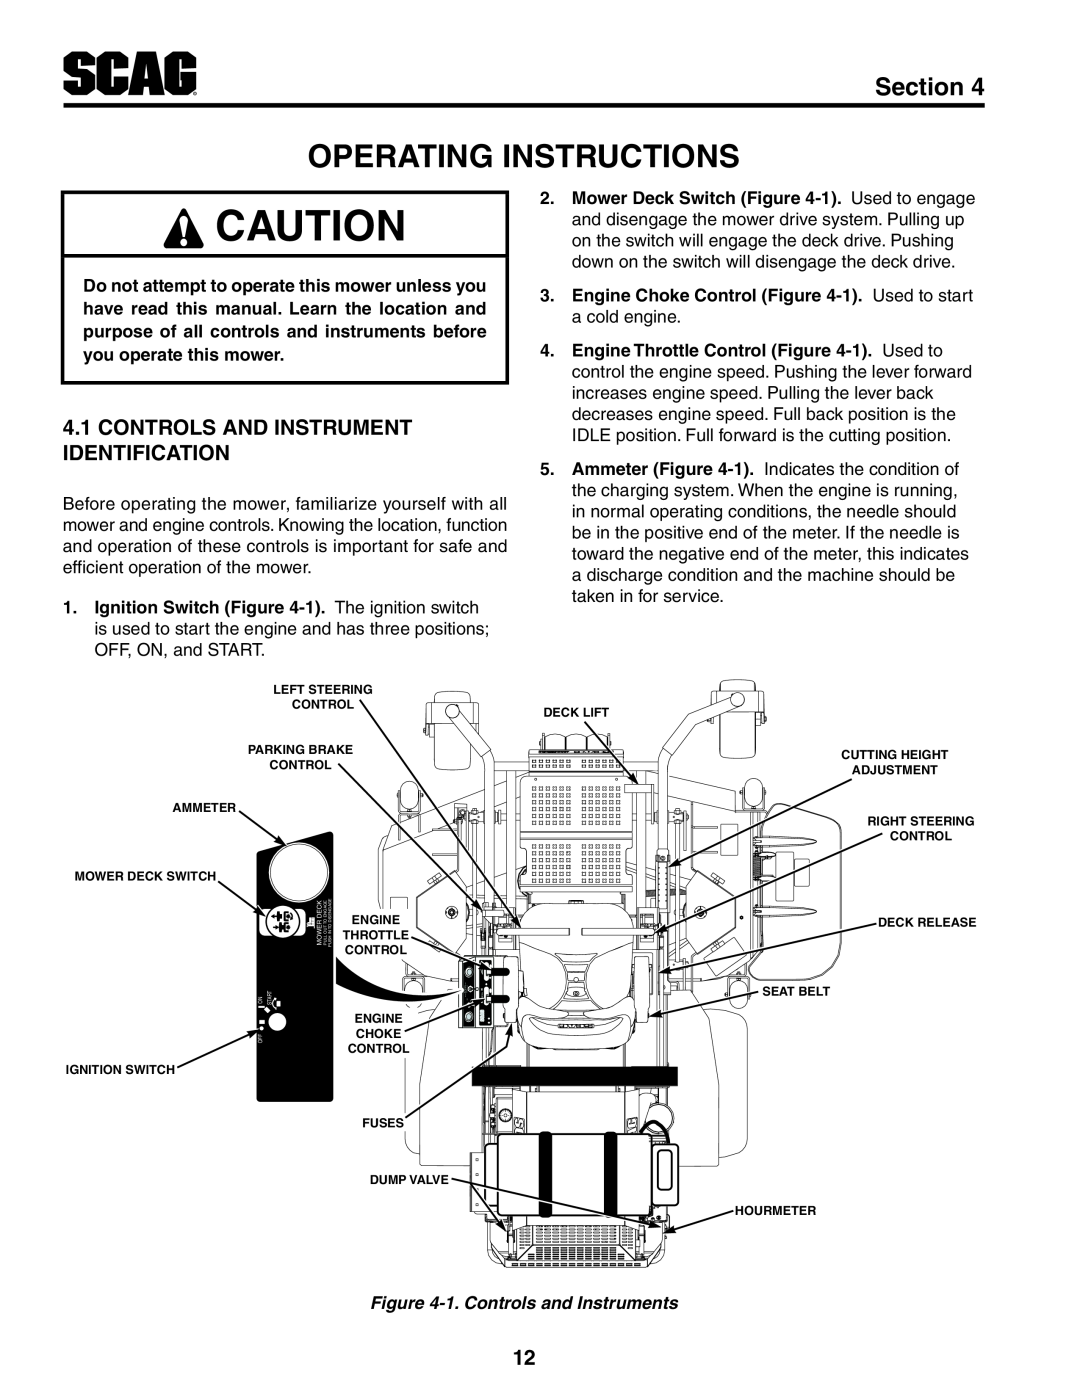 Scag Power Equipment STT52V-25CH-LP Operating Instructions, Controls And Instrument Identification, Section 